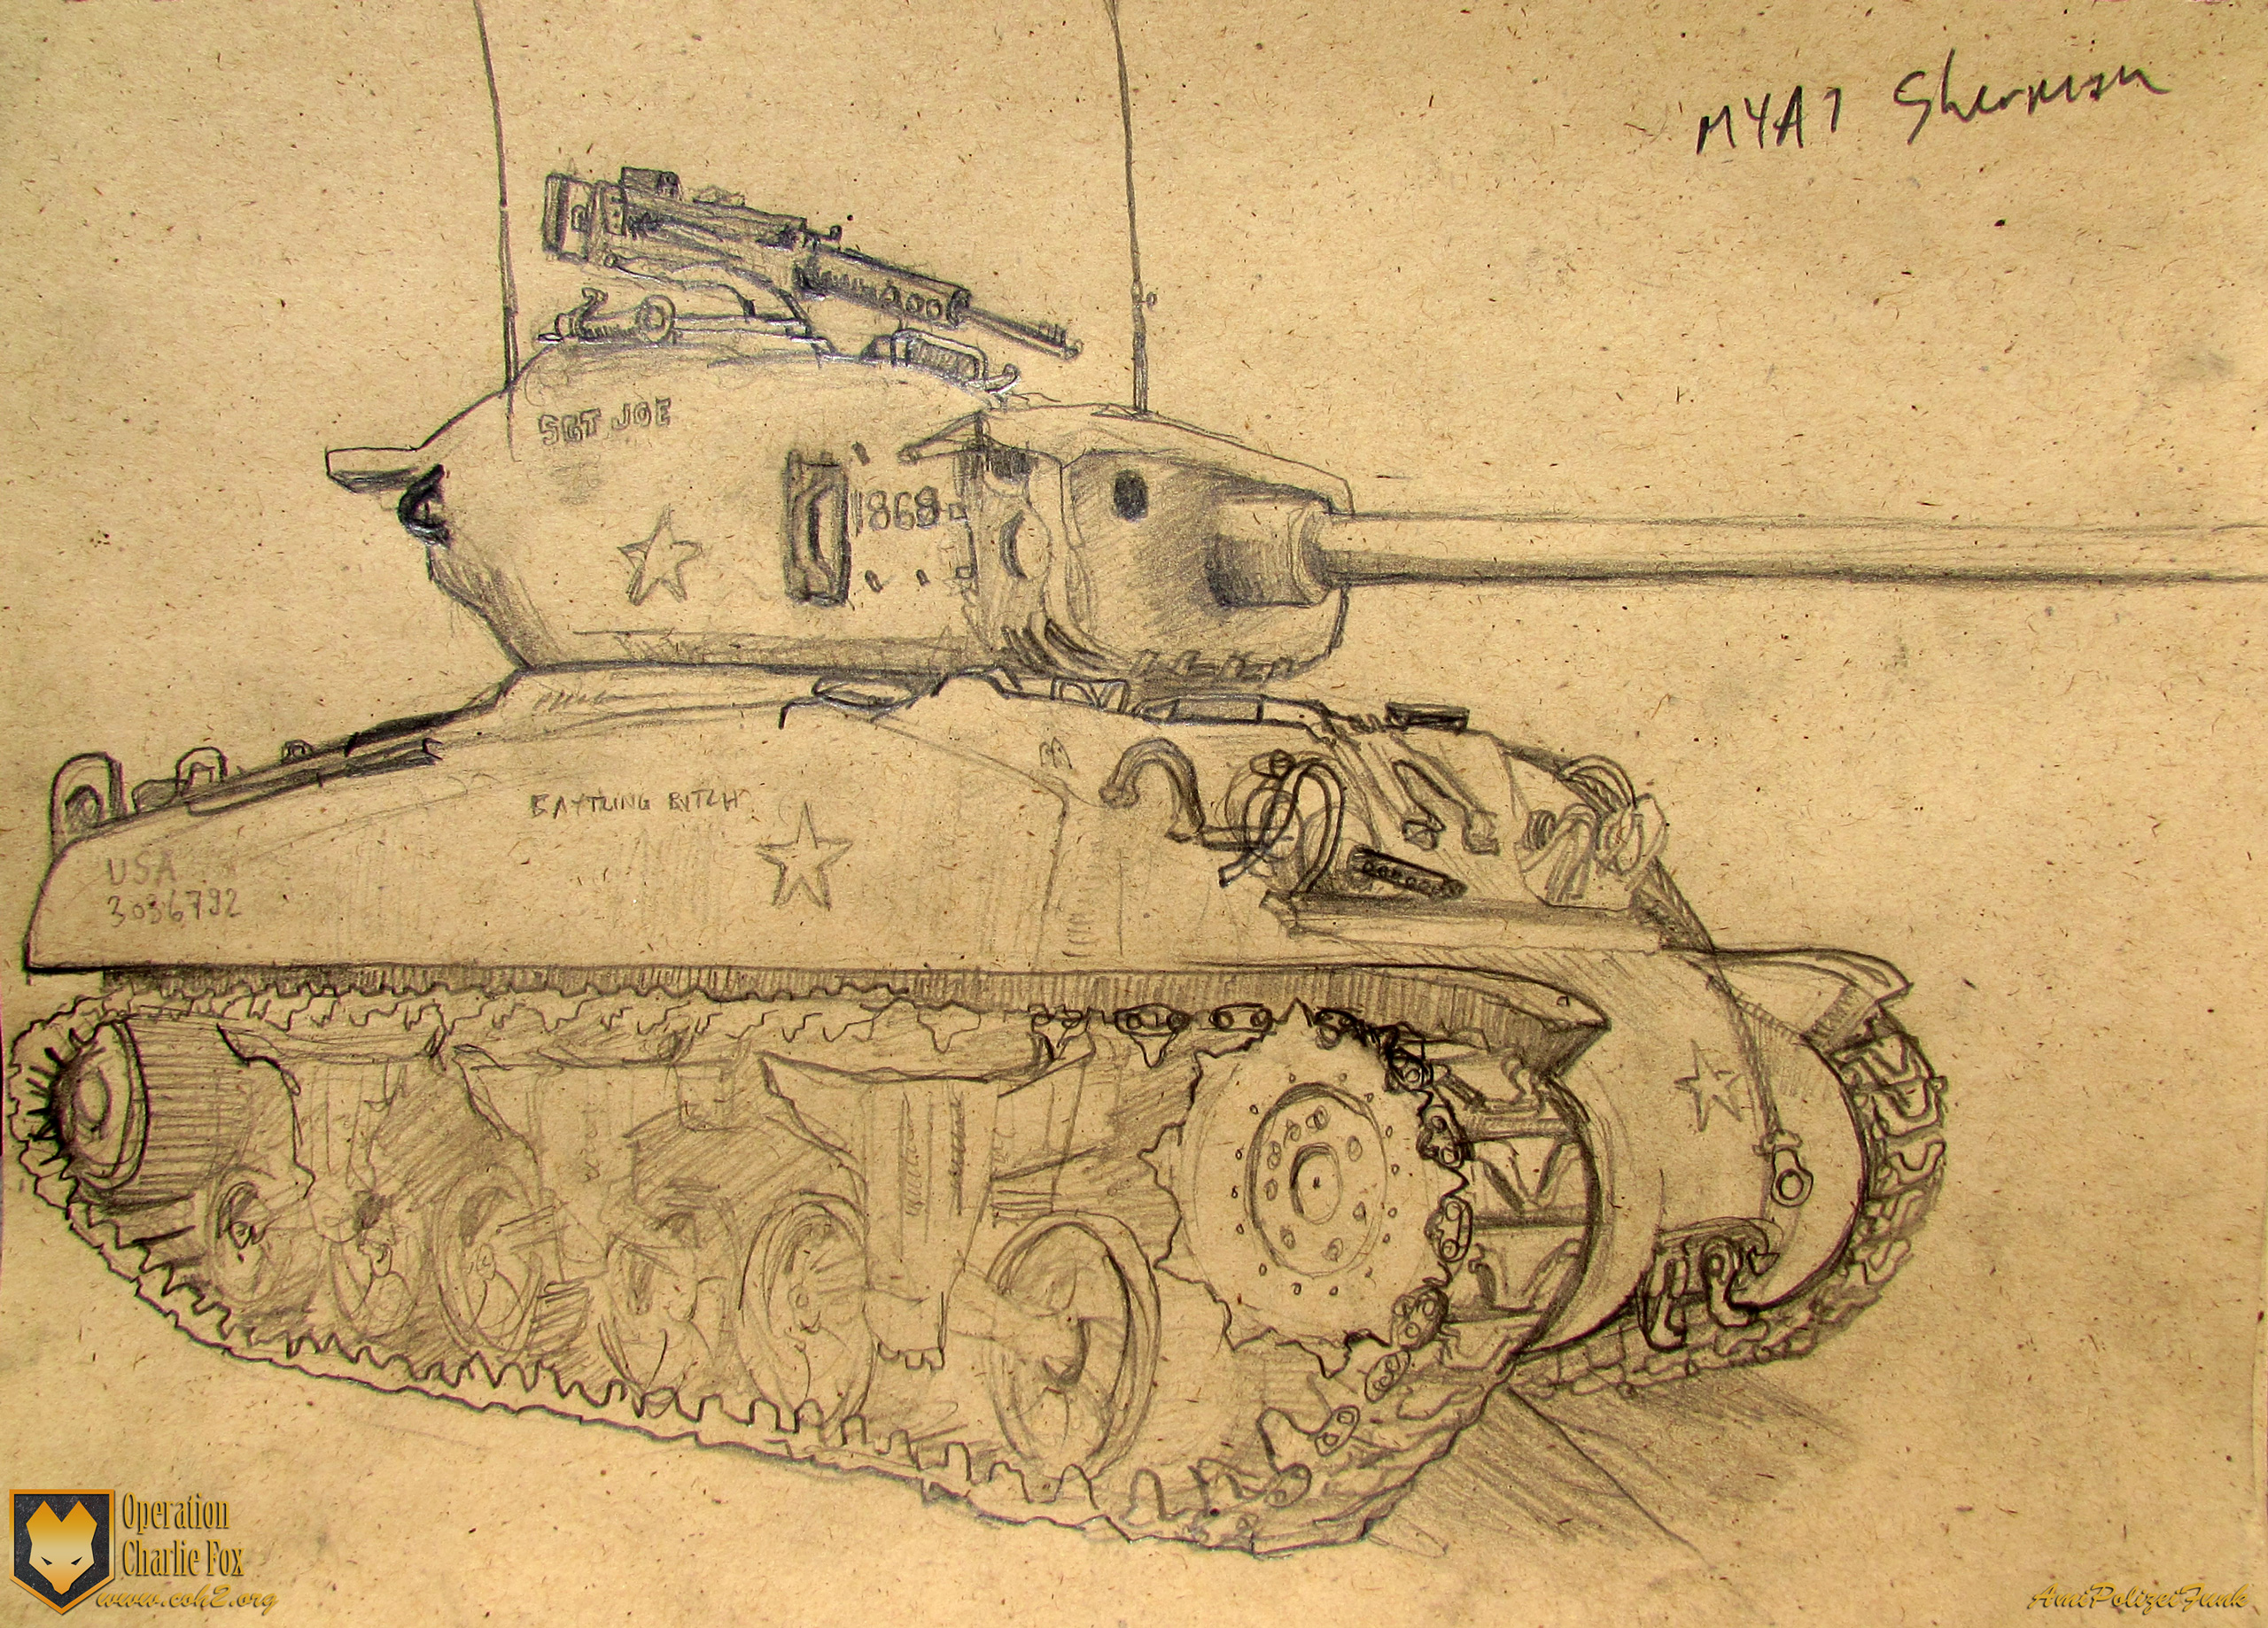 M4A1 Sherman drawing by AmiPolizeiFunk.